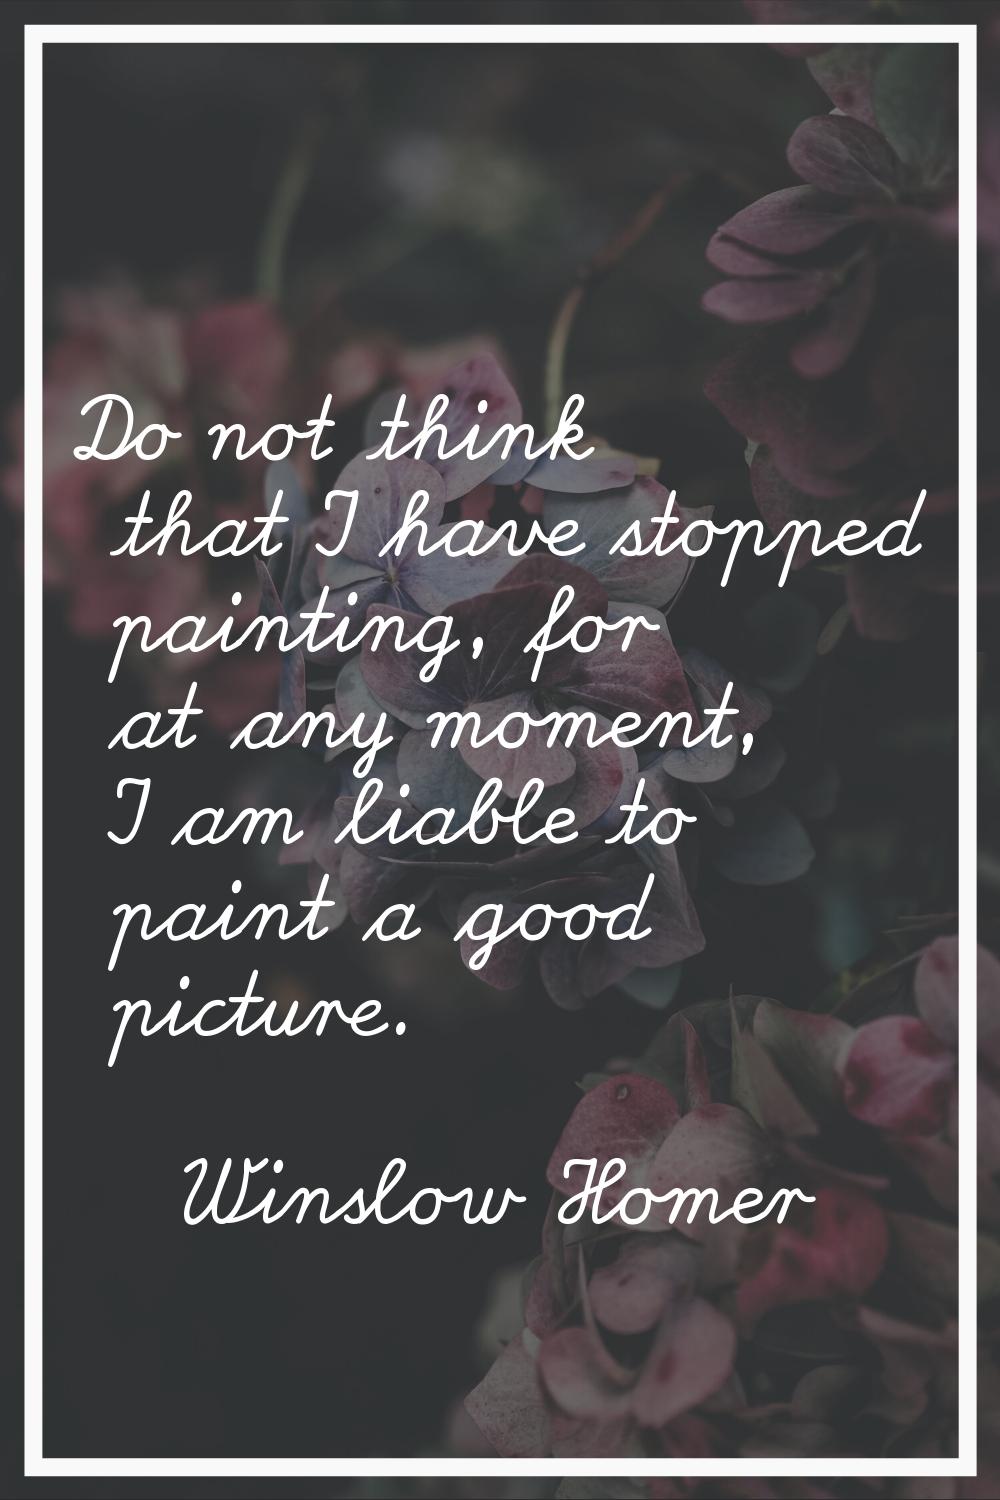 Do not think that I have stopped painting, for at any moment, I am liable to paint a good picture.